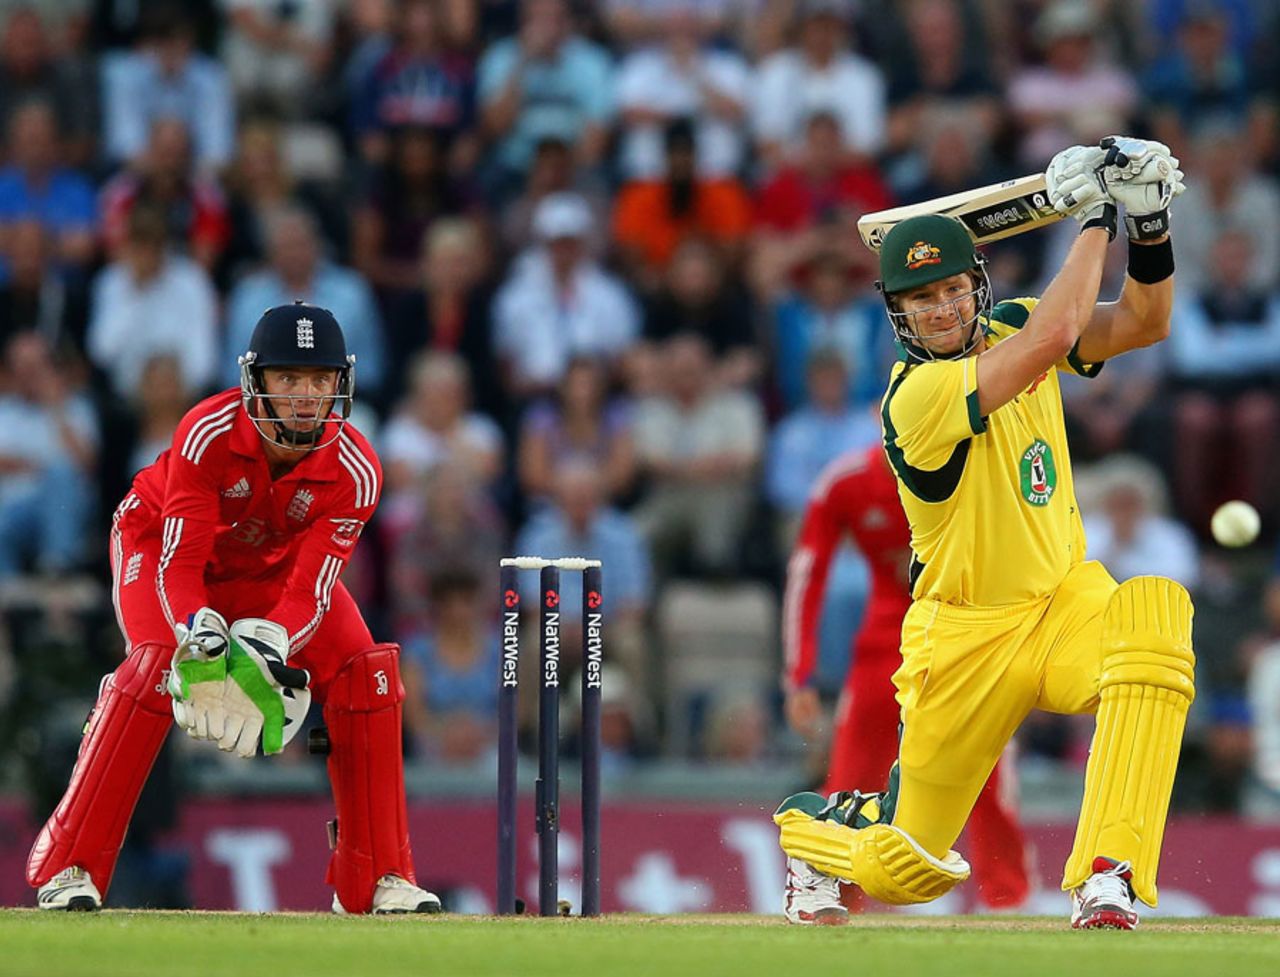 Shane Watson's handy innings paled into insignificance, England v Australia, 1st T20, Ageas Bowl, August 29, 2013